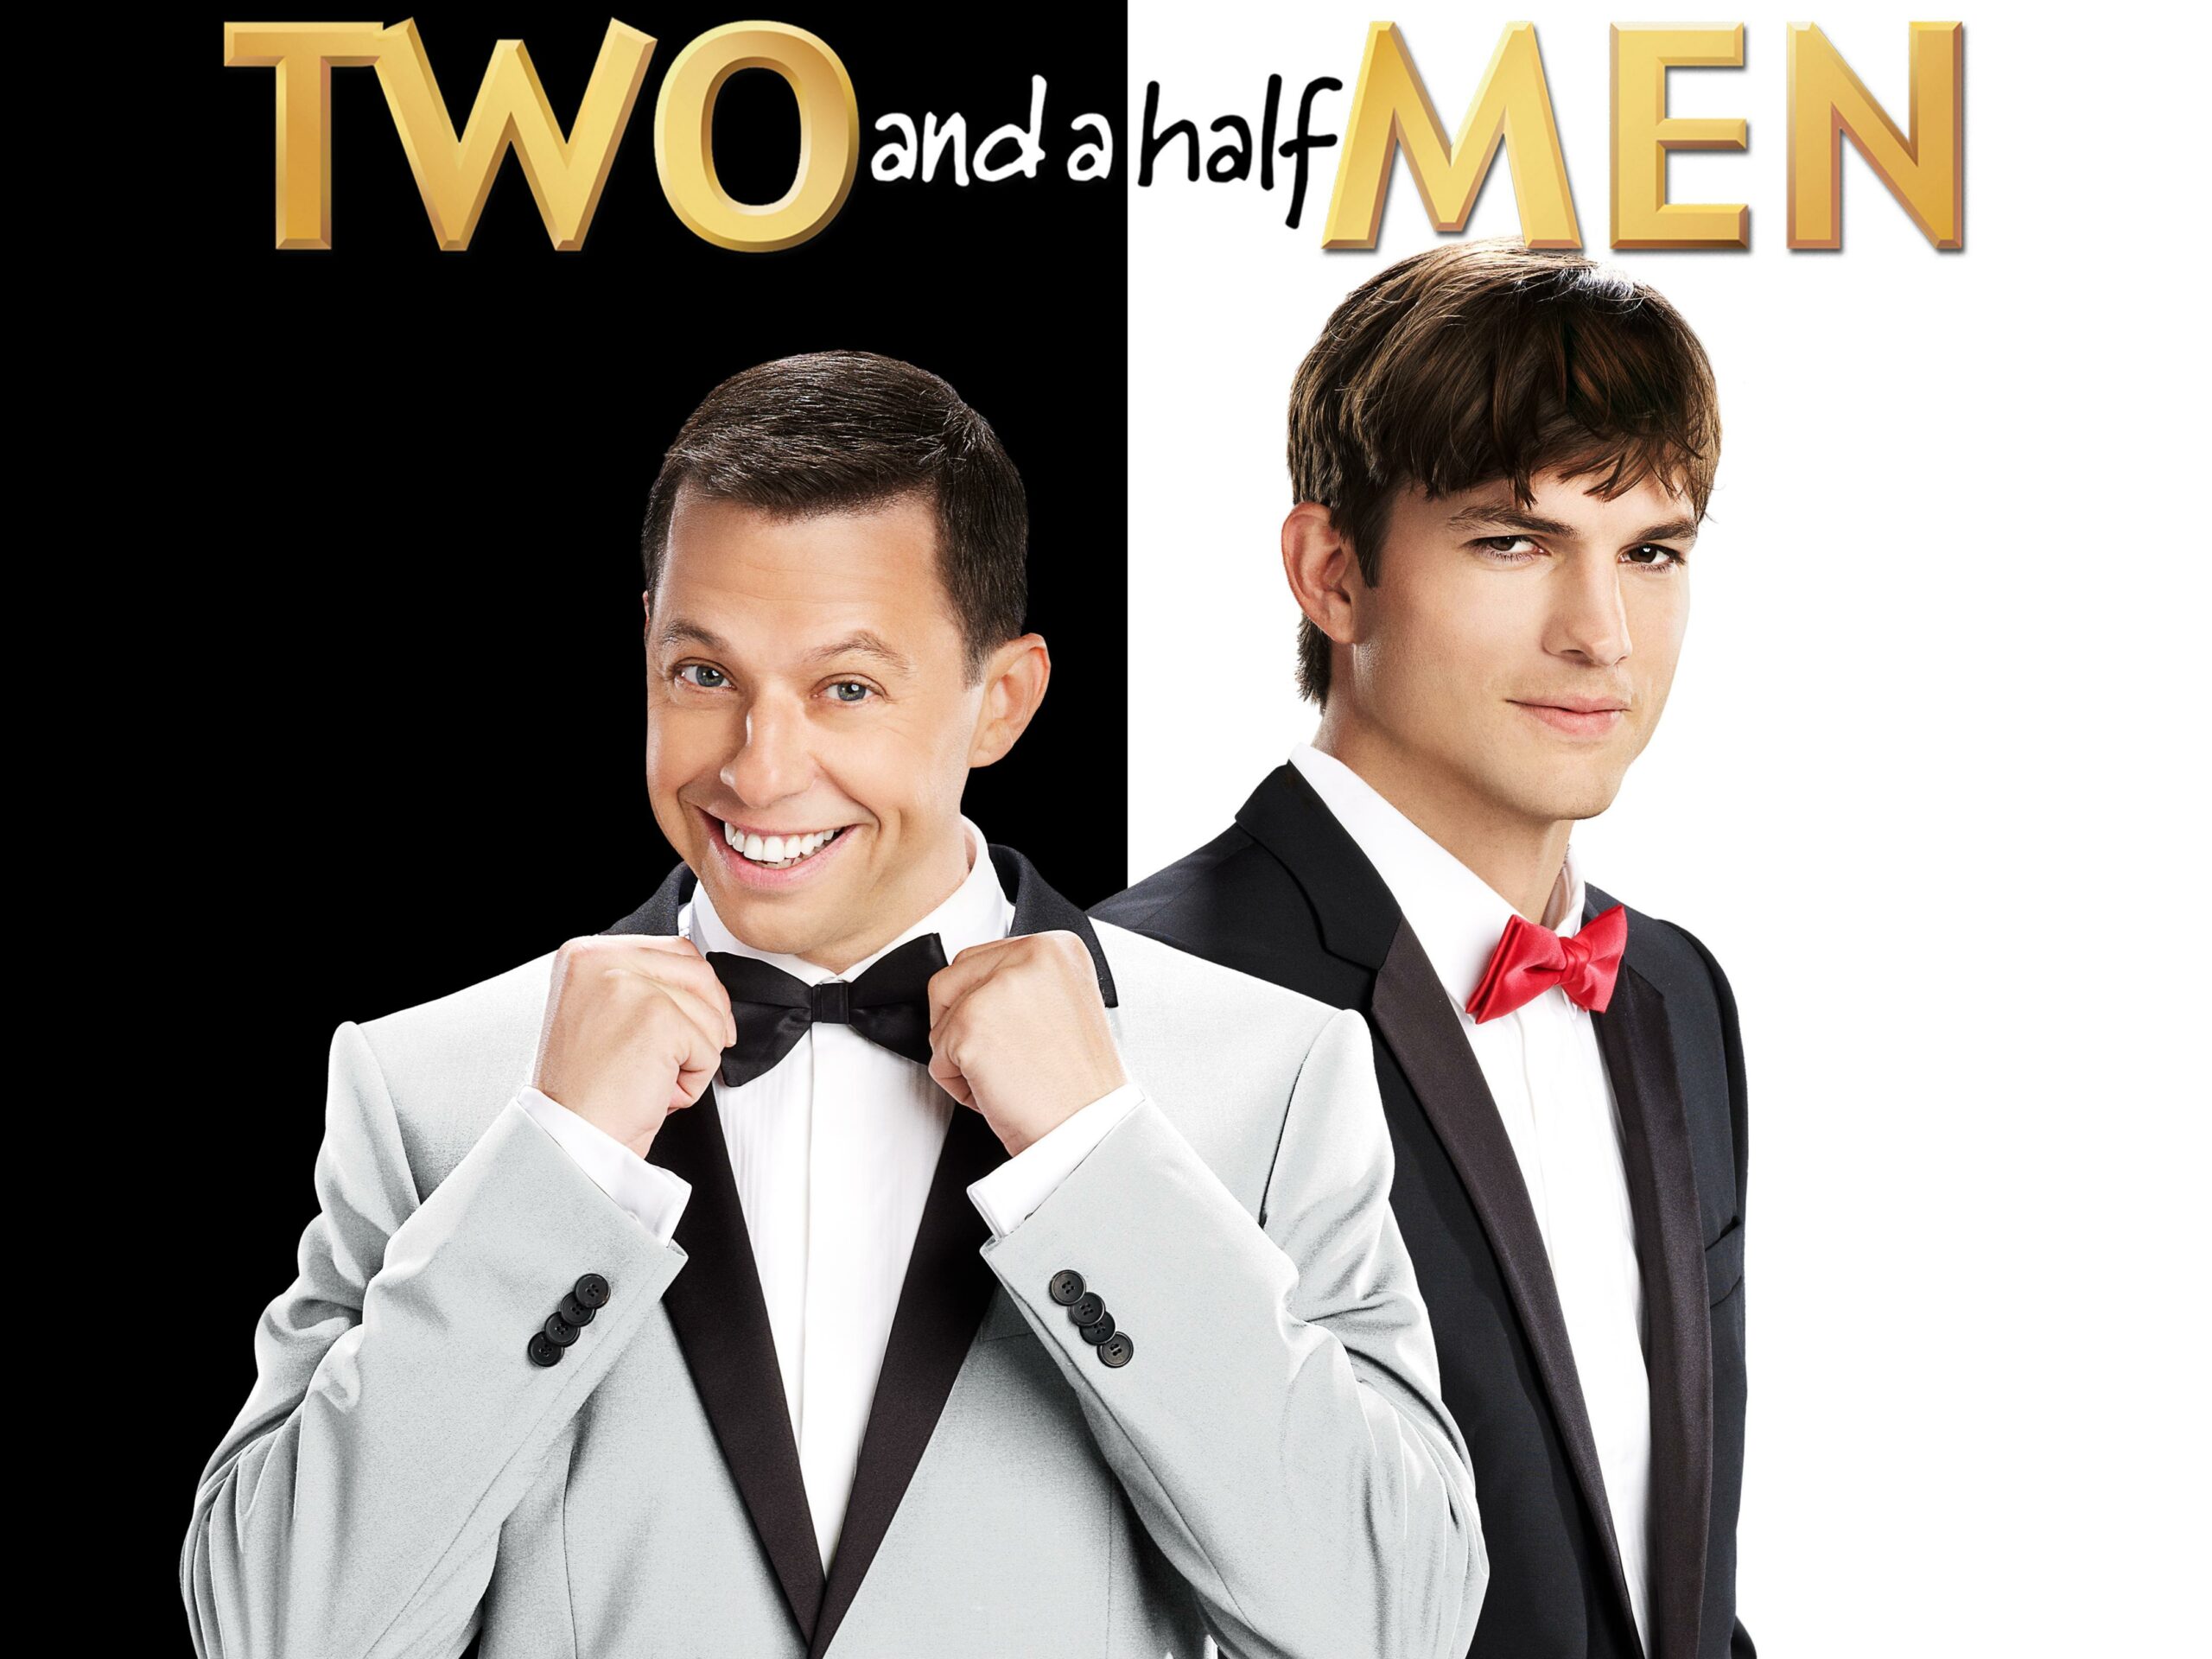 How 'Two and a Half Men' Unexpectedly Saved the Sitcom World